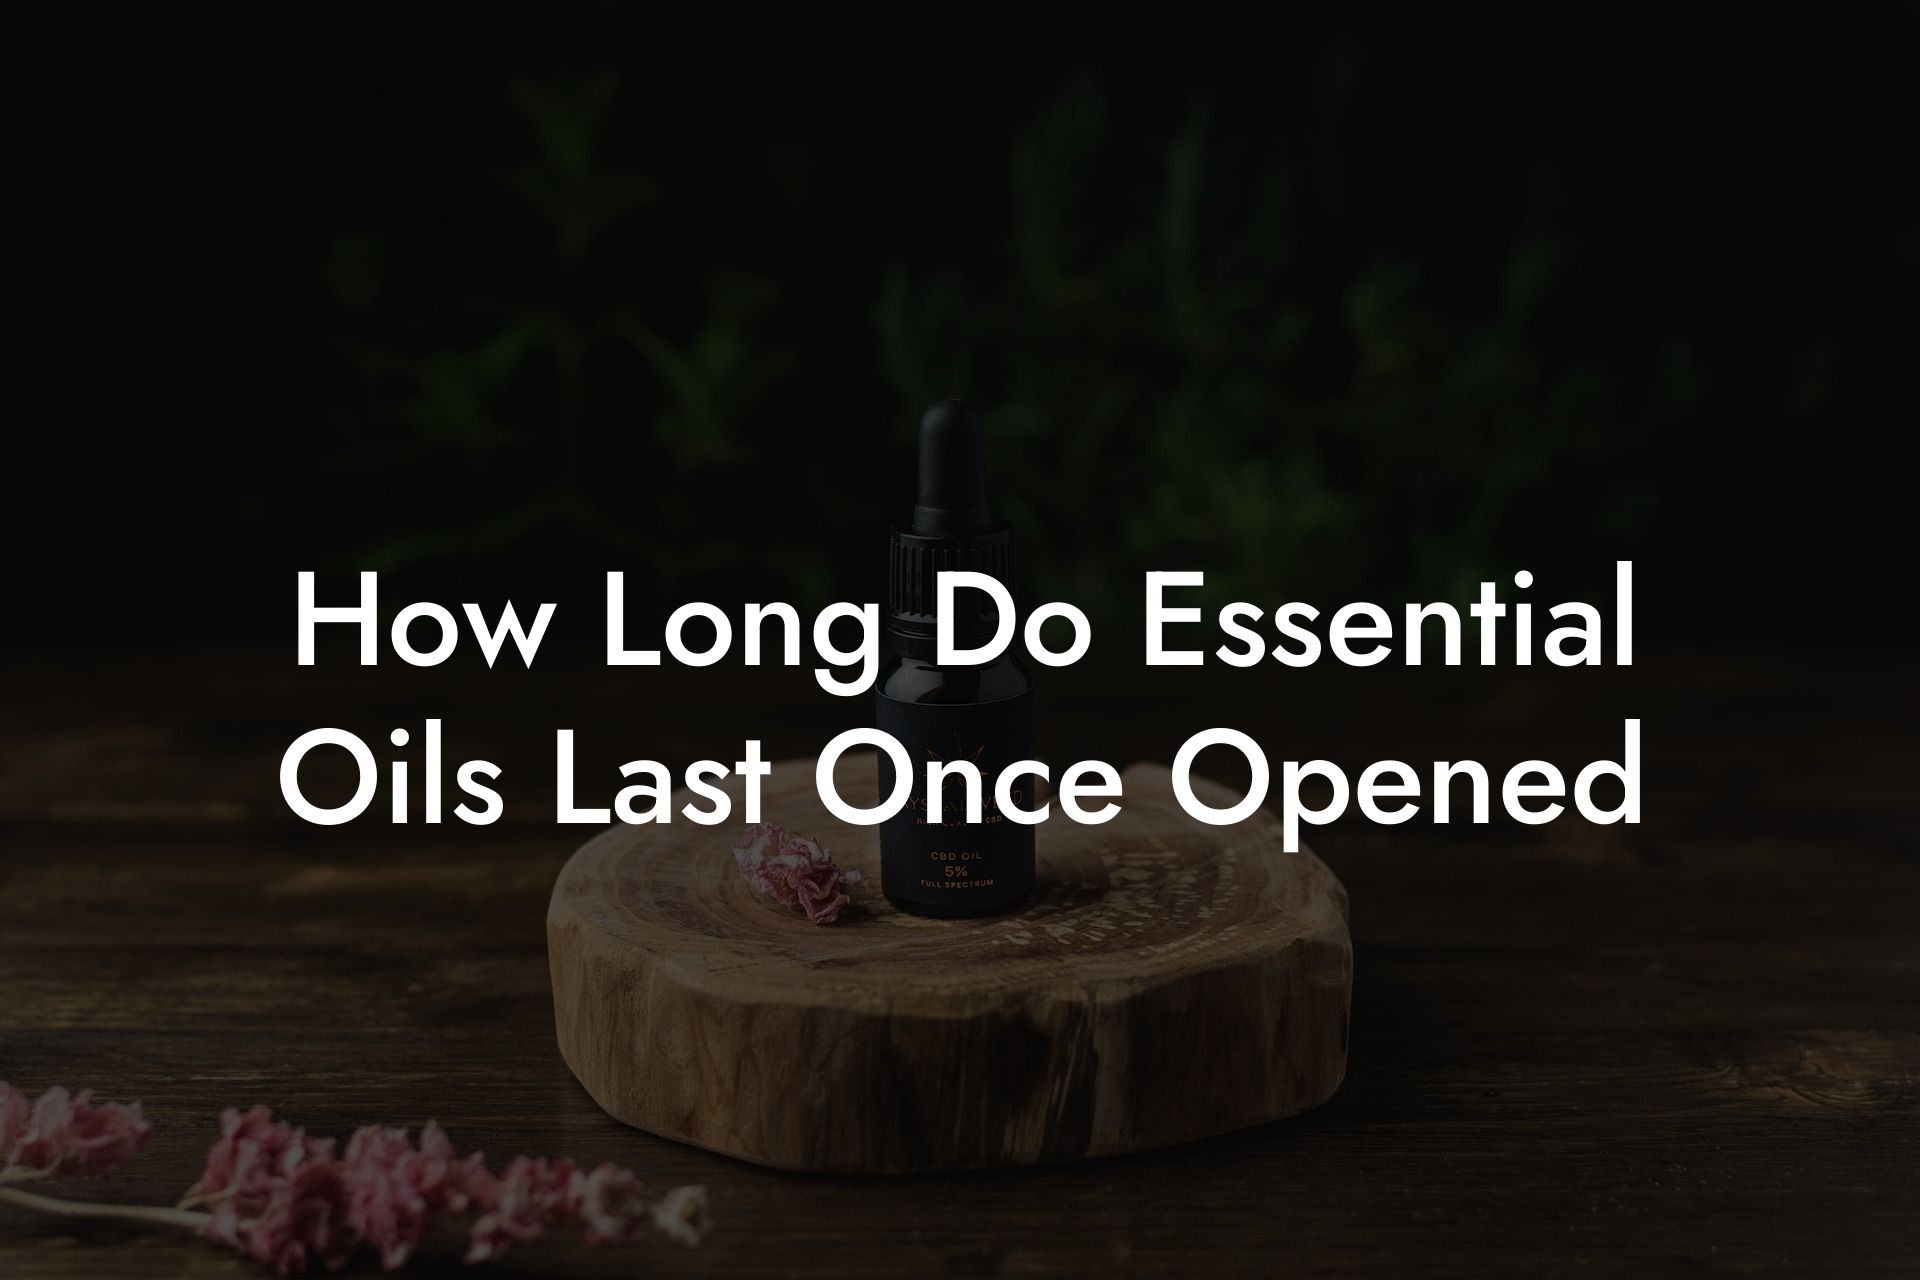 How Long Do Essential Oils Last Once Opened